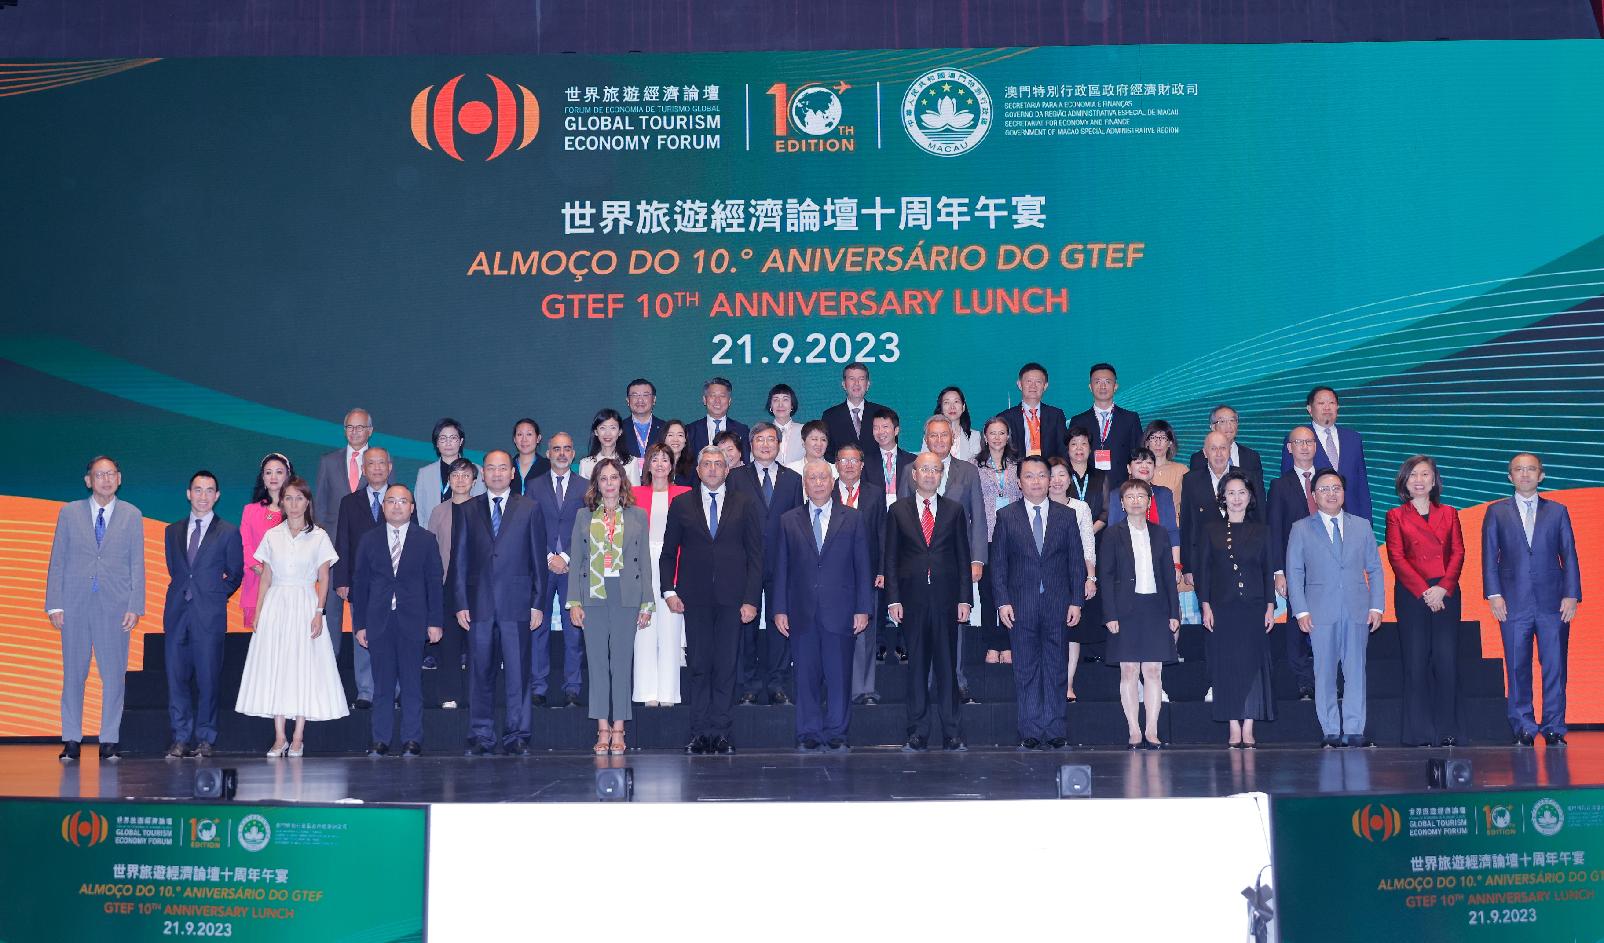 Global Tourism Economy Forum builds a platform for international exchange and cooperation and unites tourism stakeholders for innovative collaboration (Press Release of the Office of the Secretary for Economy and Finance)